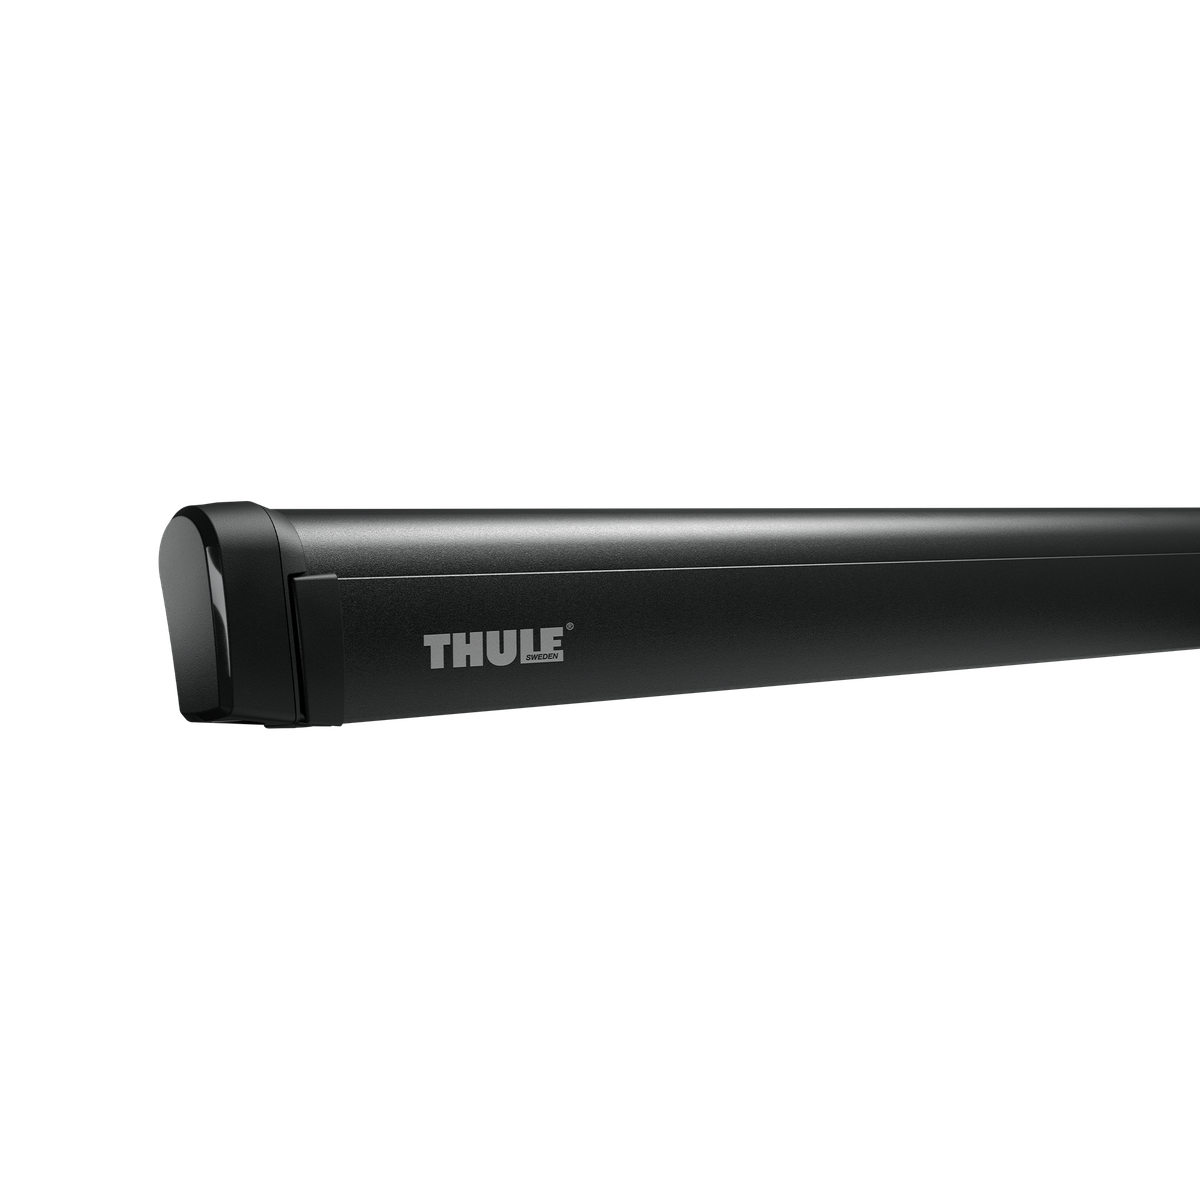 Thule 4200 wall awning 3.00x2.50m anthracite black